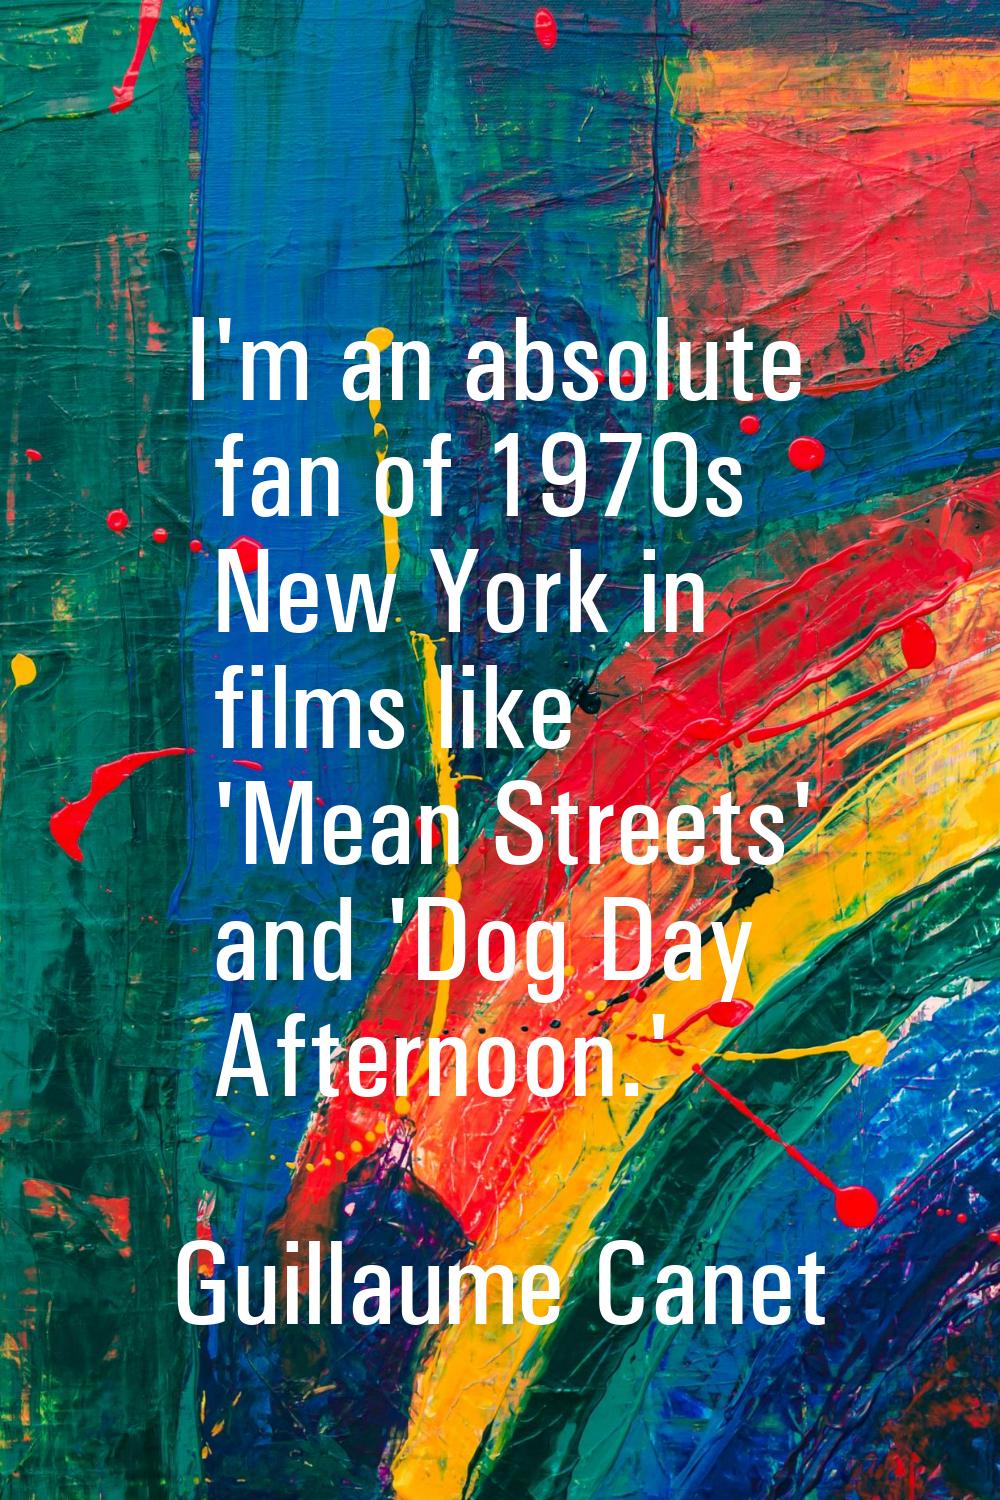 I'm an absolute fan of 1970s New York in films like 'Mean Streets' and 'Dog Day Afternoon.'